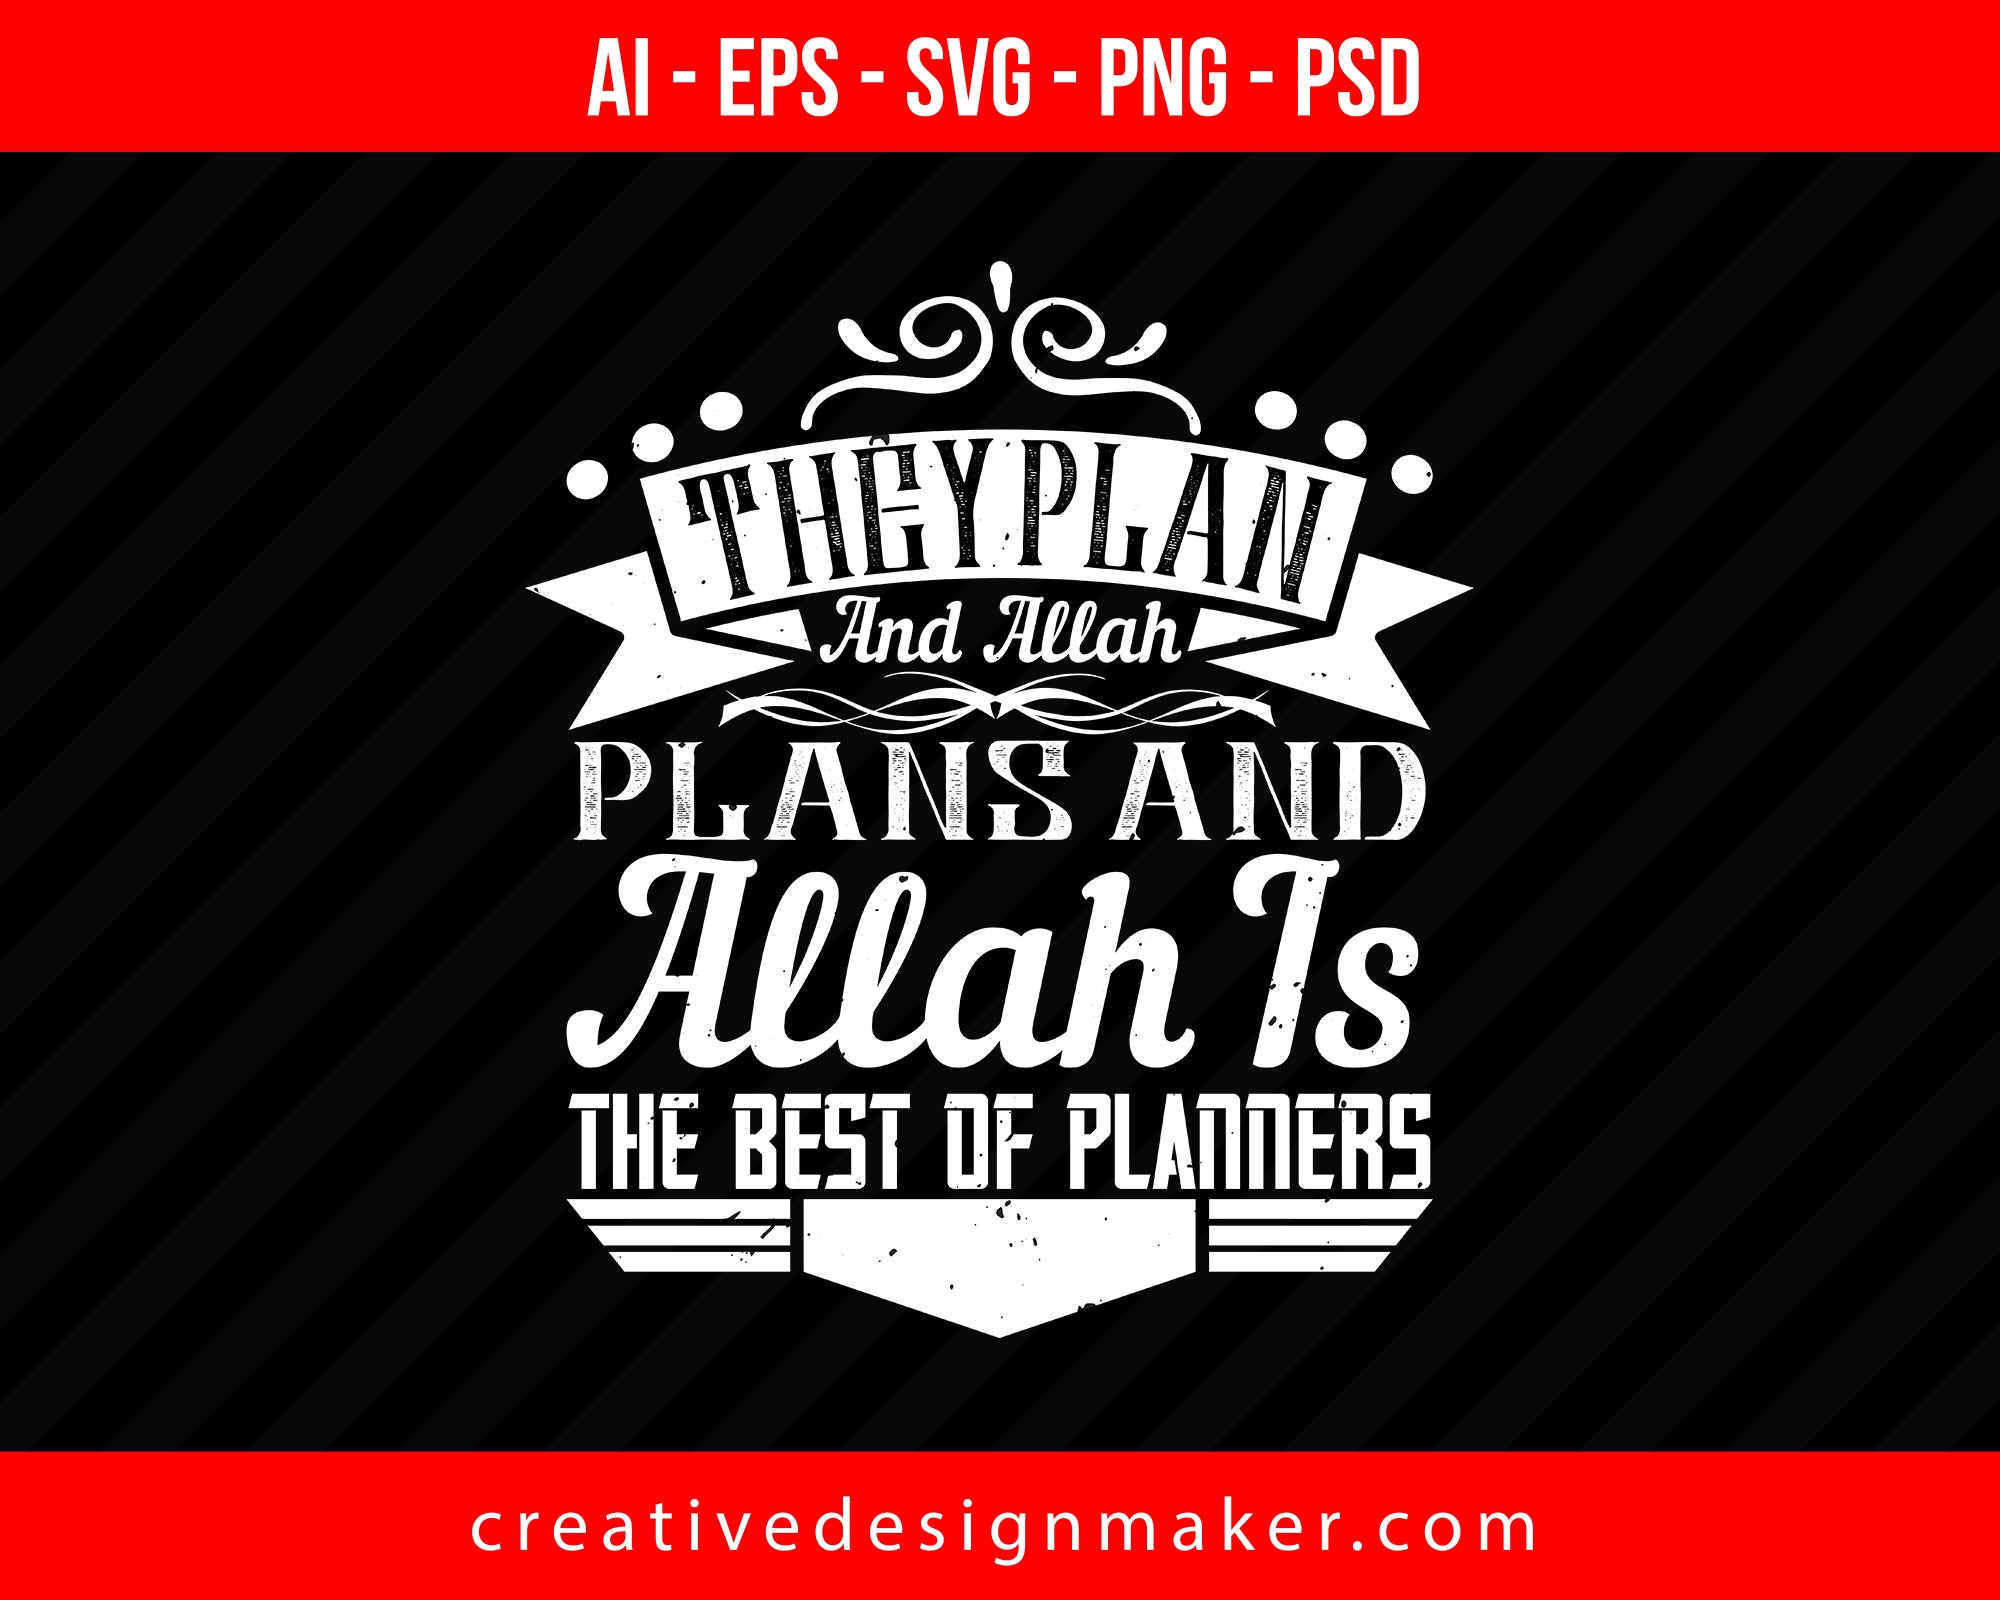 They plan, and ALLAH plans & ALLAH is The Best of Planners Islamic Print Ready Editable T-Shirt SVG Design!